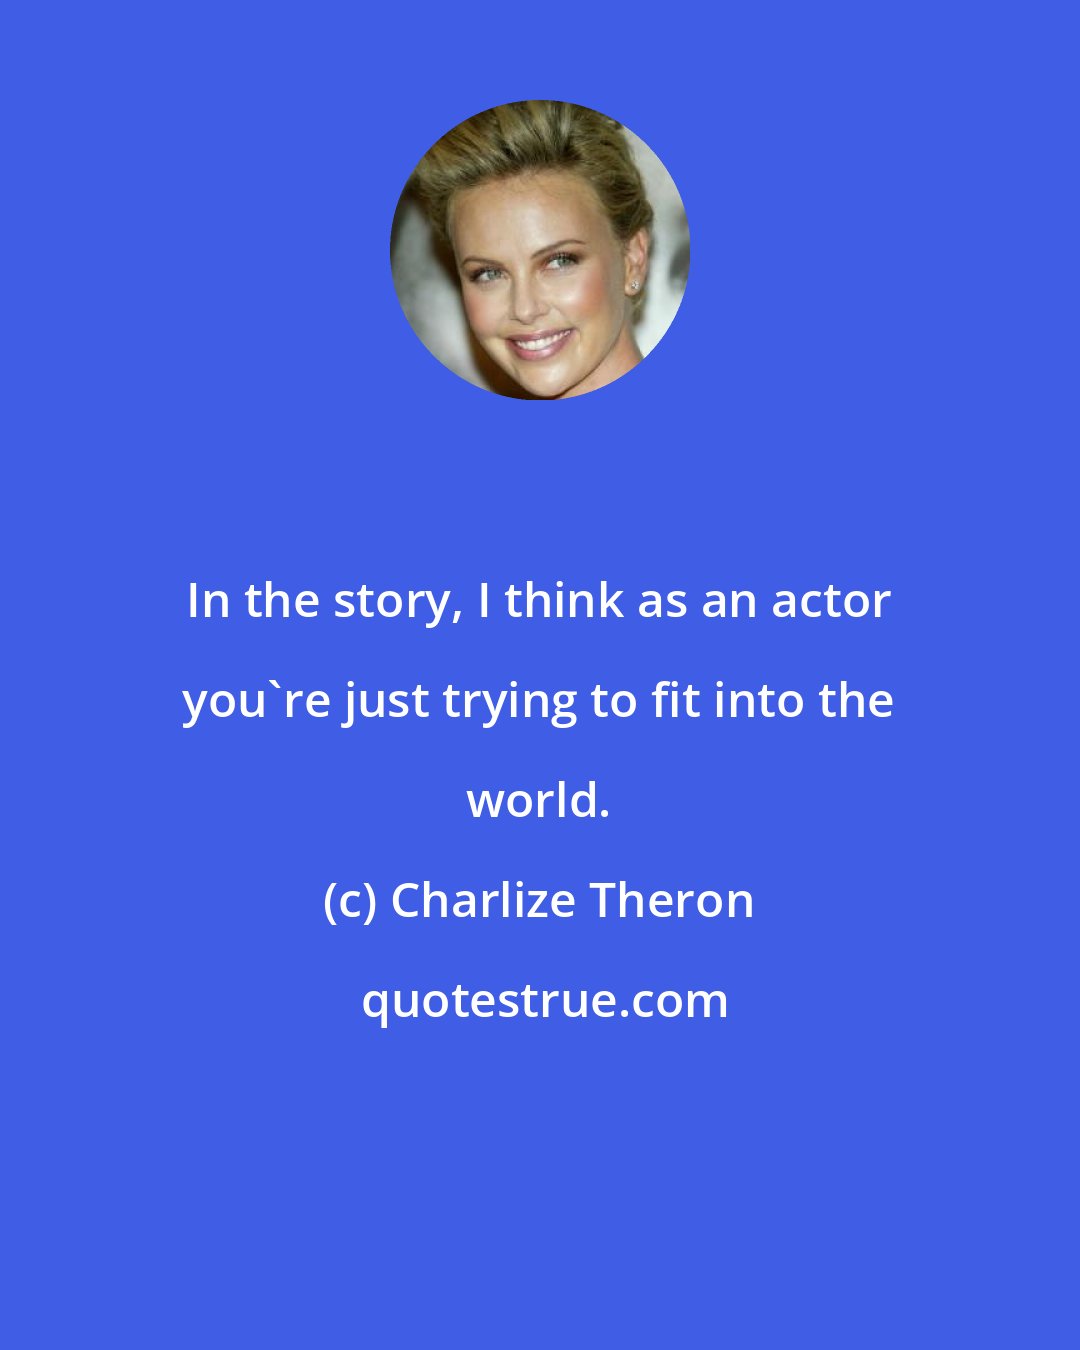 Charlize Theron: In the story, I think as an actor you're just trying to fit into the world.